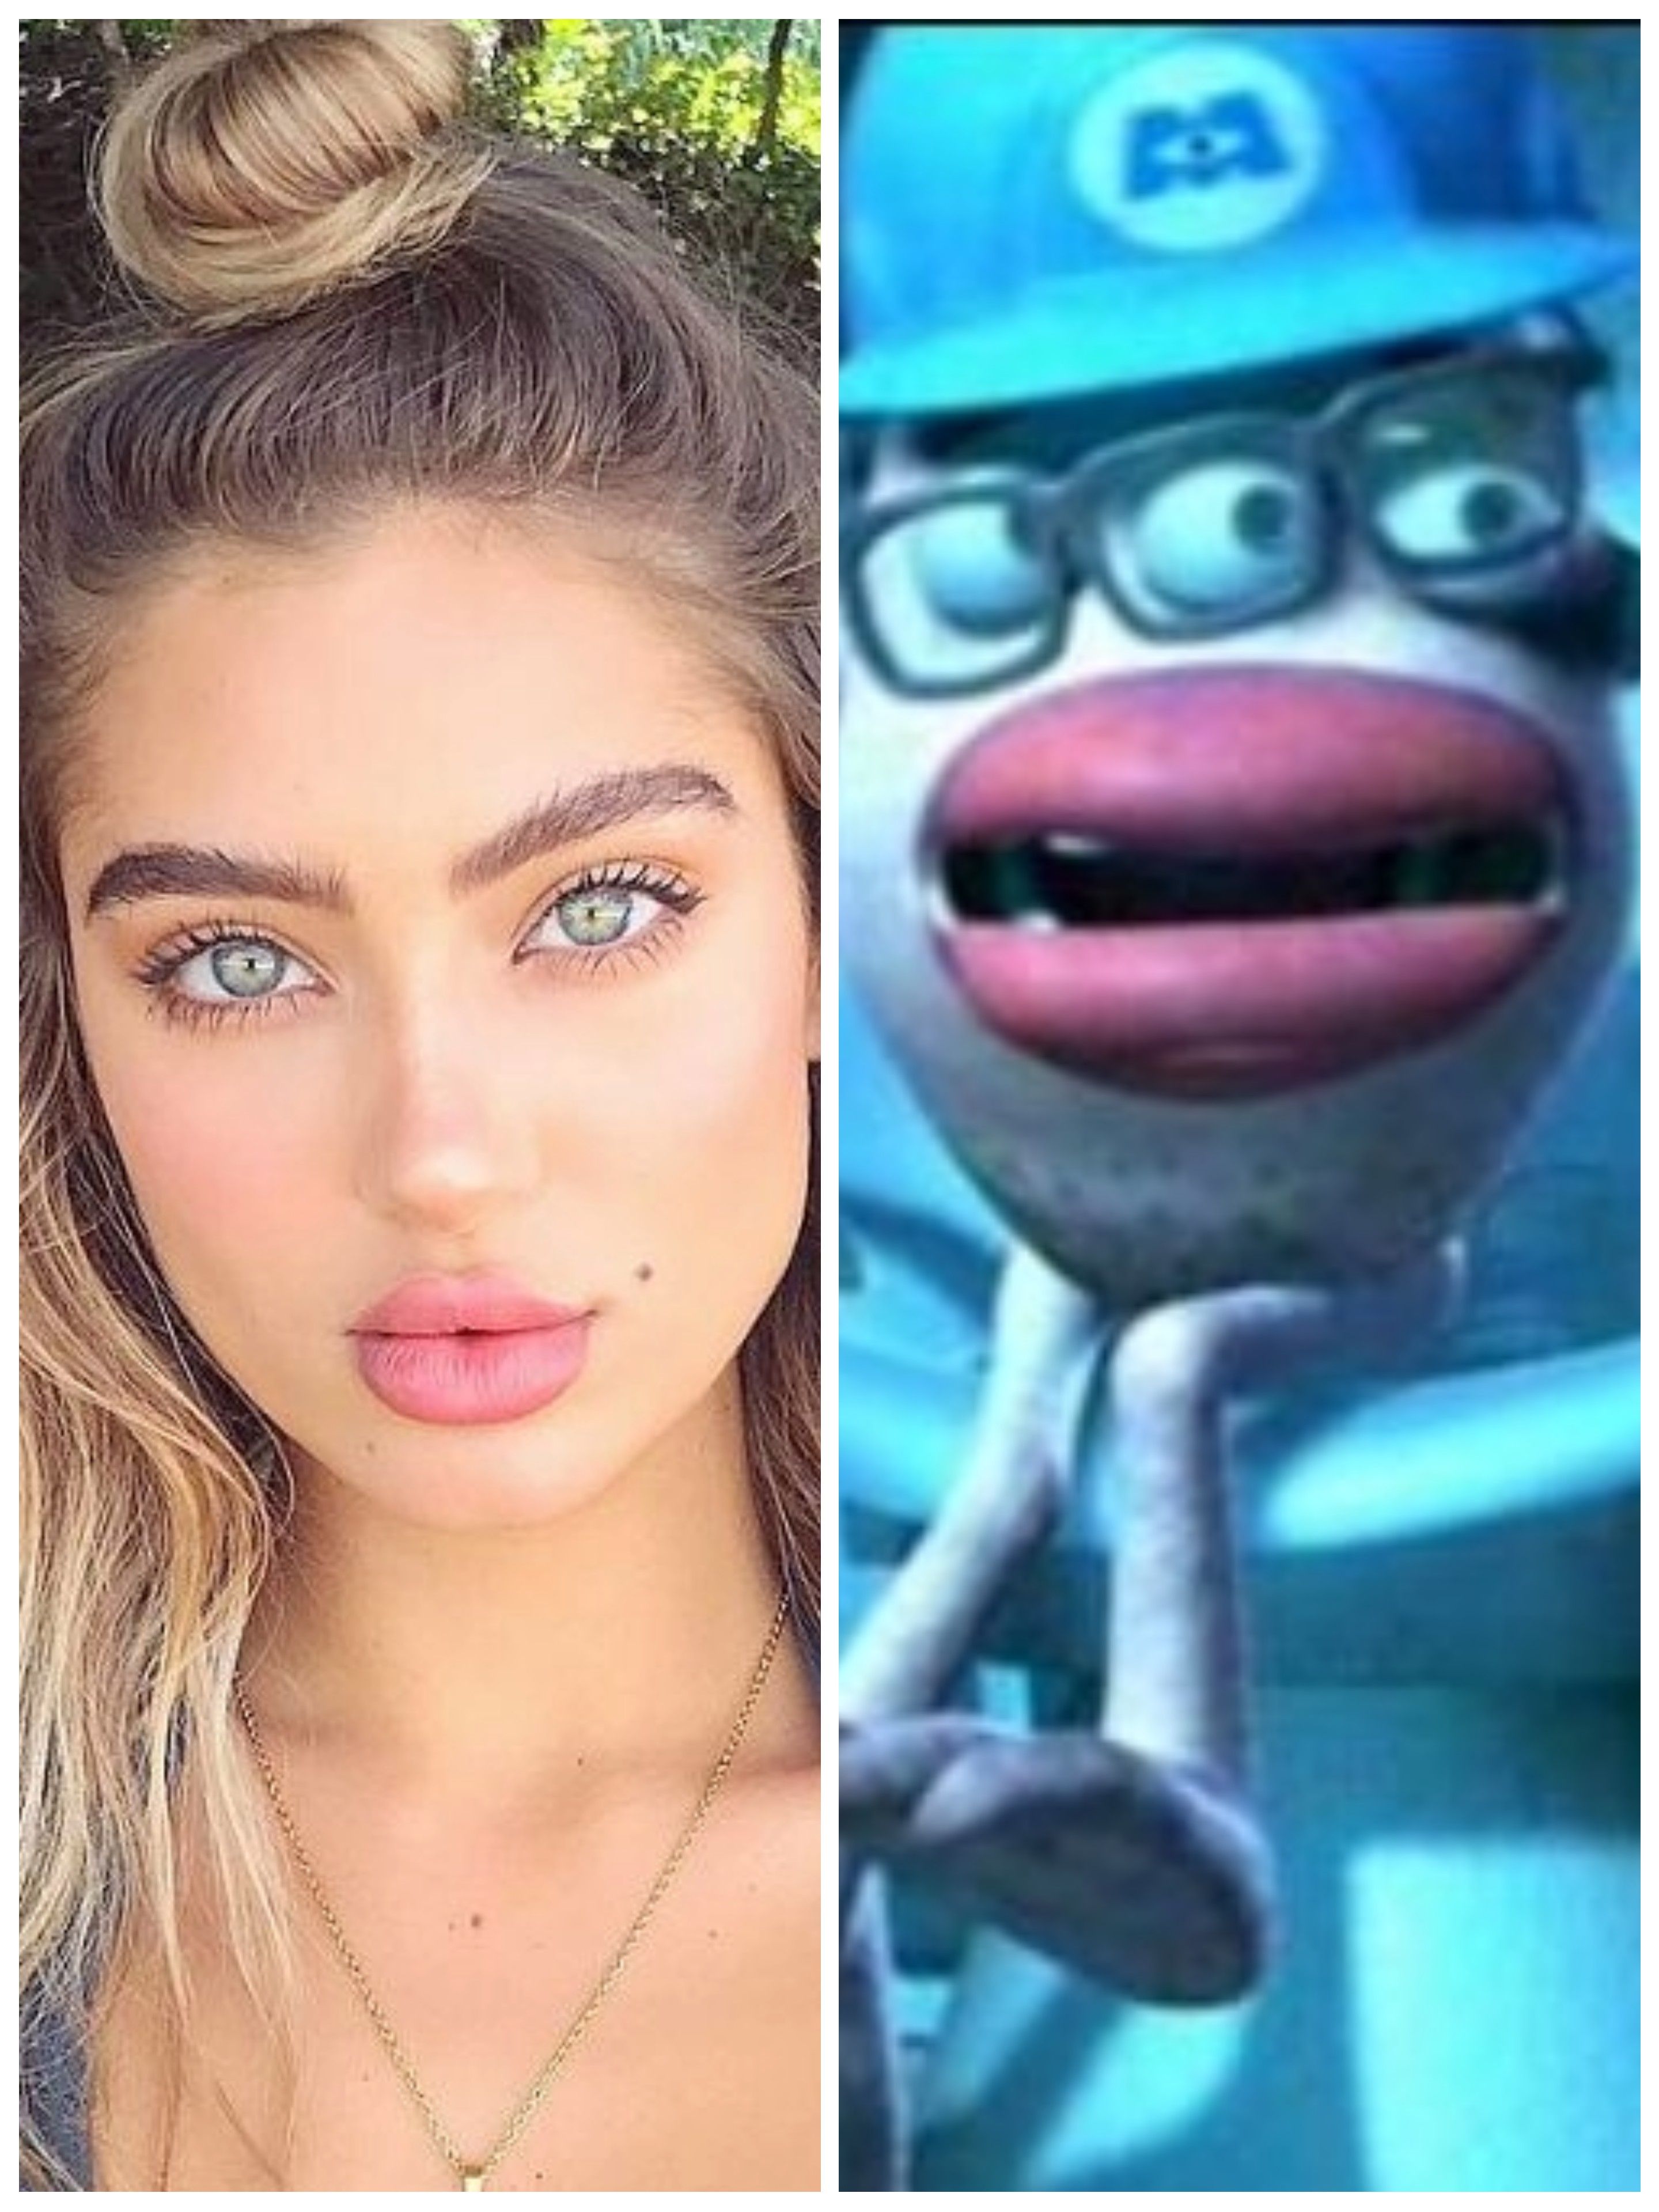 How women with lip injections think they look v.s. how they really look